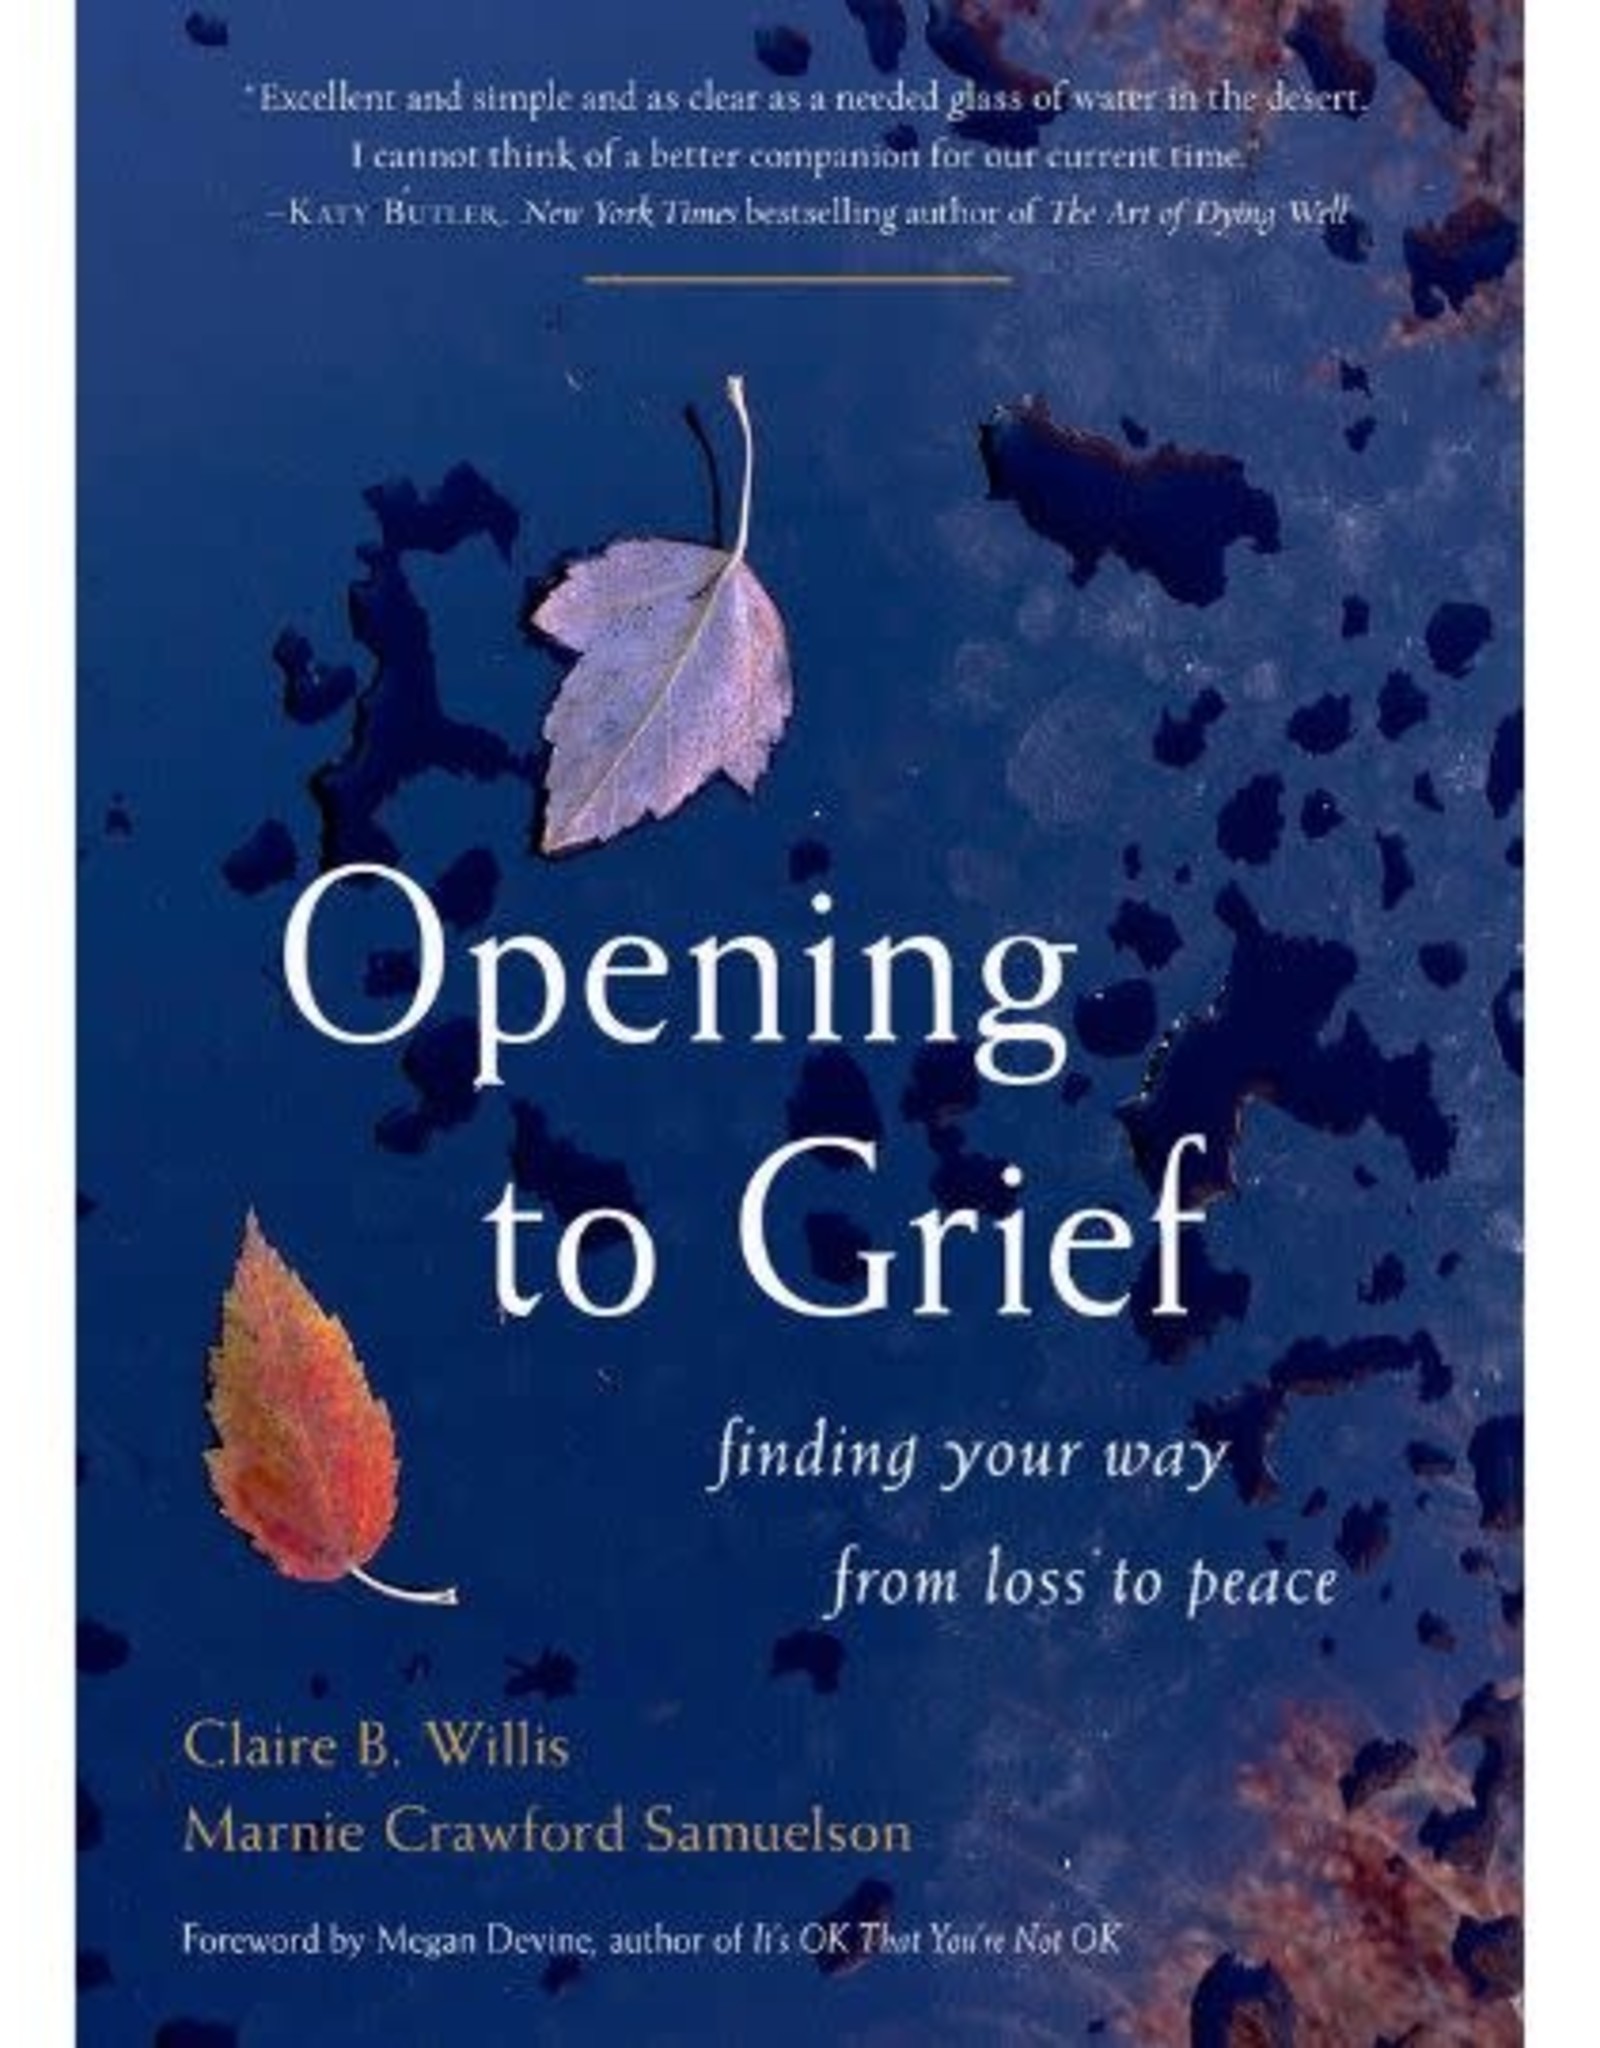 Opening to Grief by Claire B. Willis Marnie Crawford Samuelson